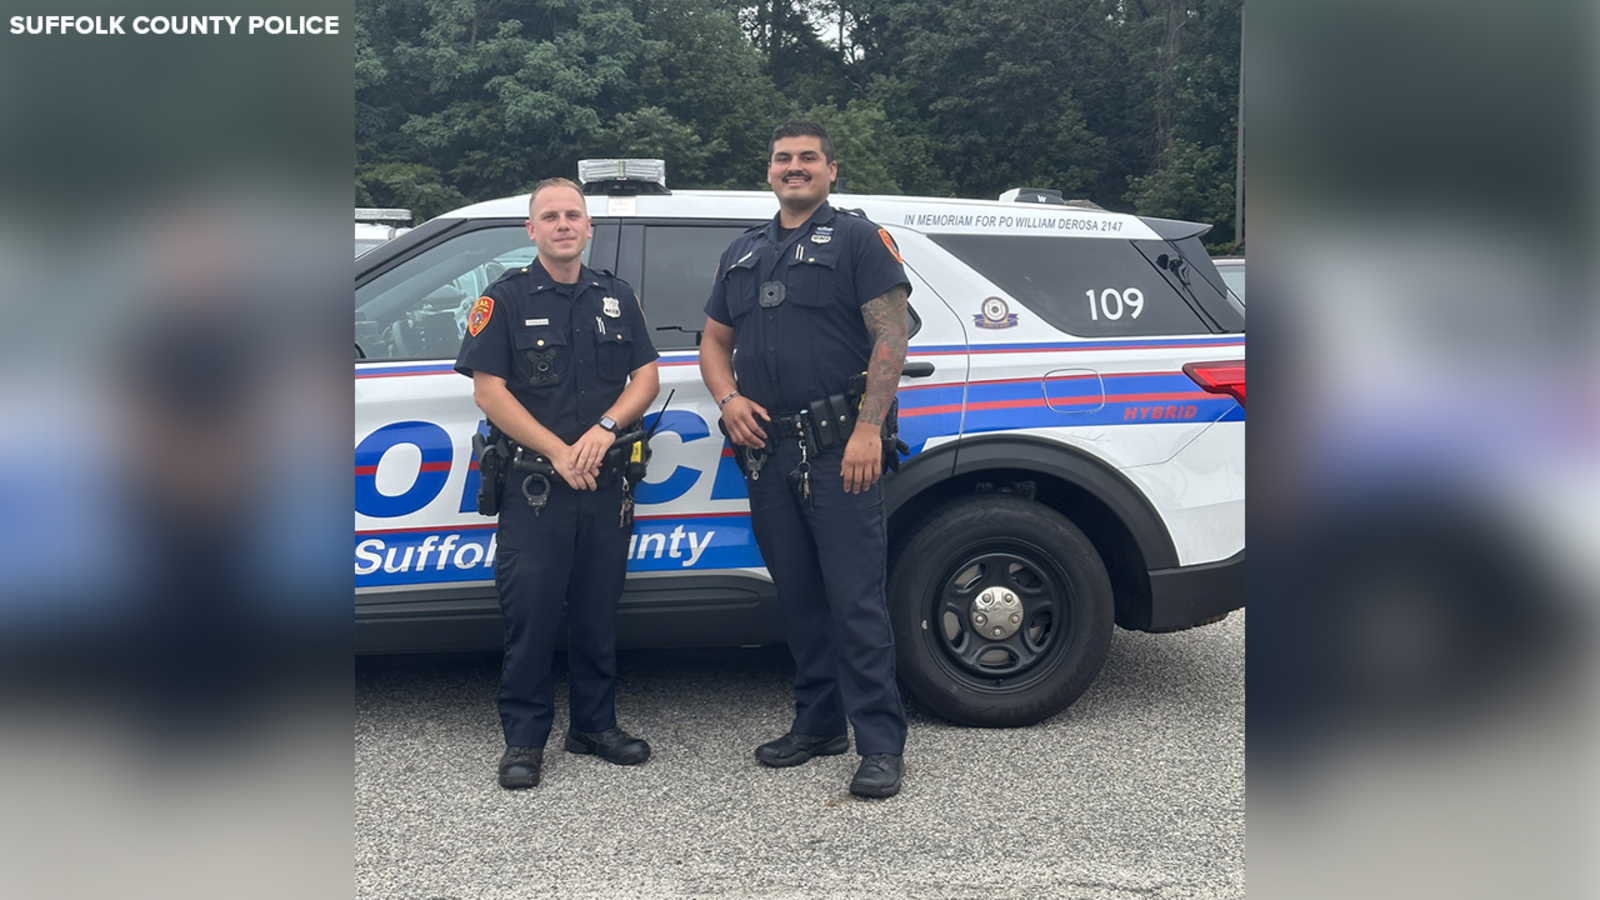 Officers help mother deliver baby girl at apartment in Amityville